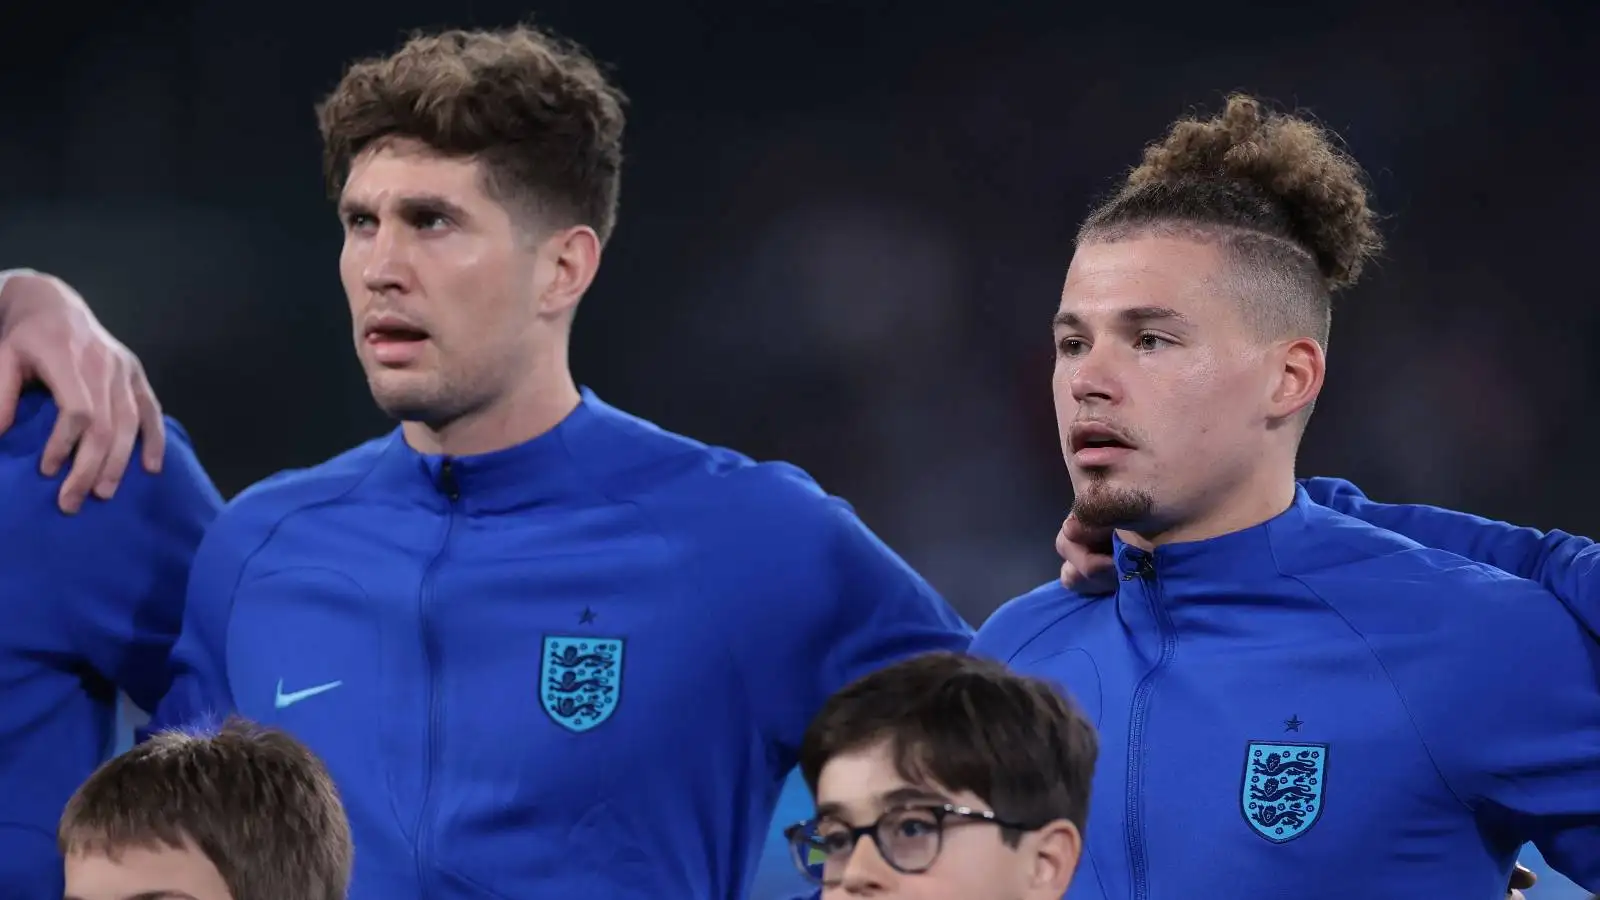 Manchester Municipal duo John Boulders and Kalvin Phillips queue up for England